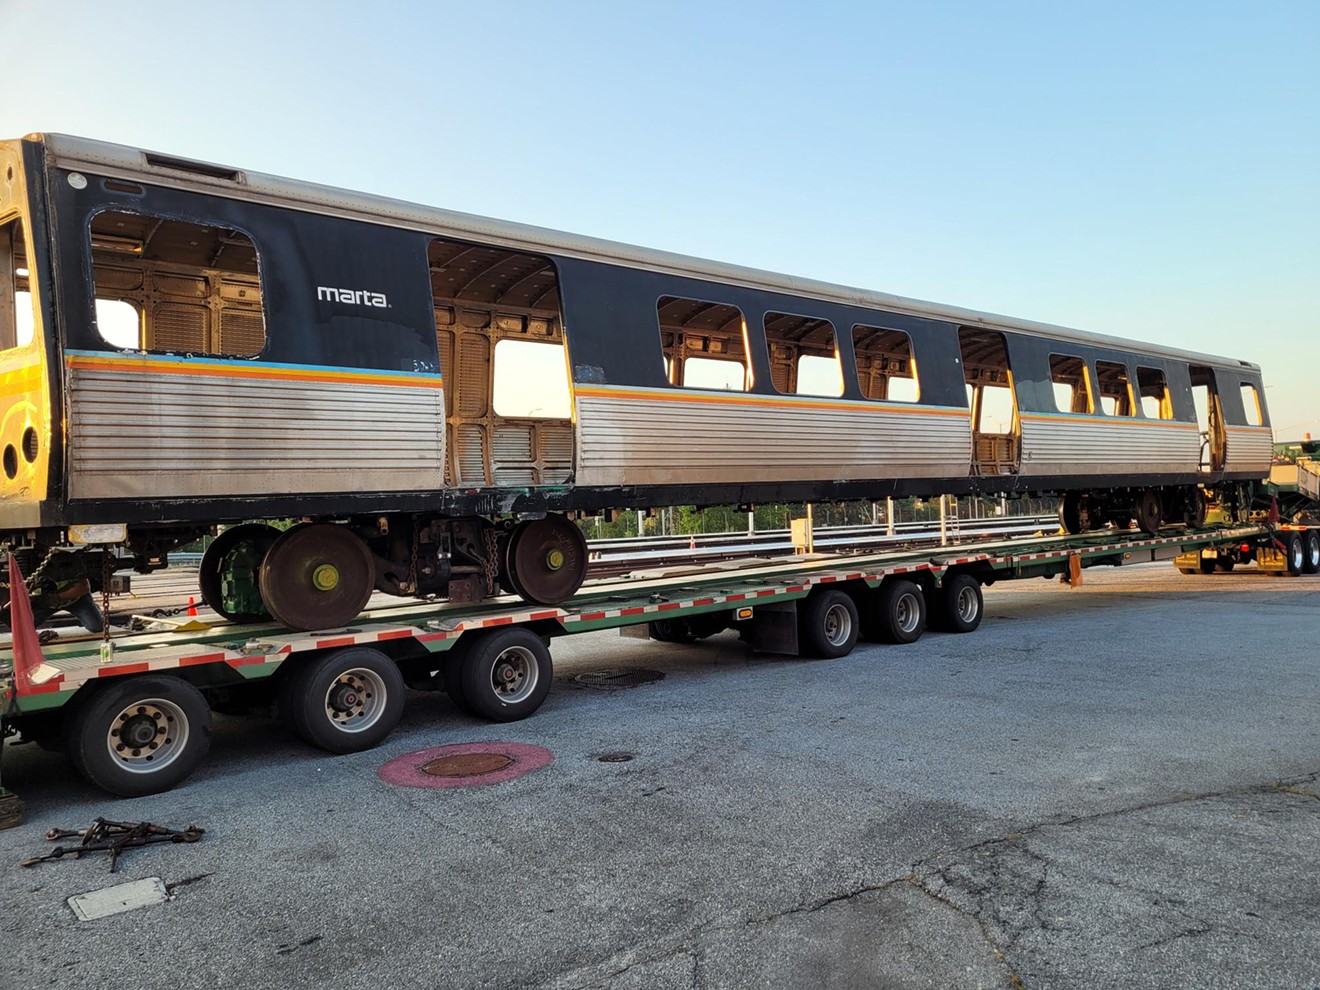 The second of two stripped and cleaned MARTA railcars left South Yard on Sept 11 headed for Savannah where it will be deployed to the bottom of the Atlantic Ocean as part of a Coastal GA DNR Reef Project.